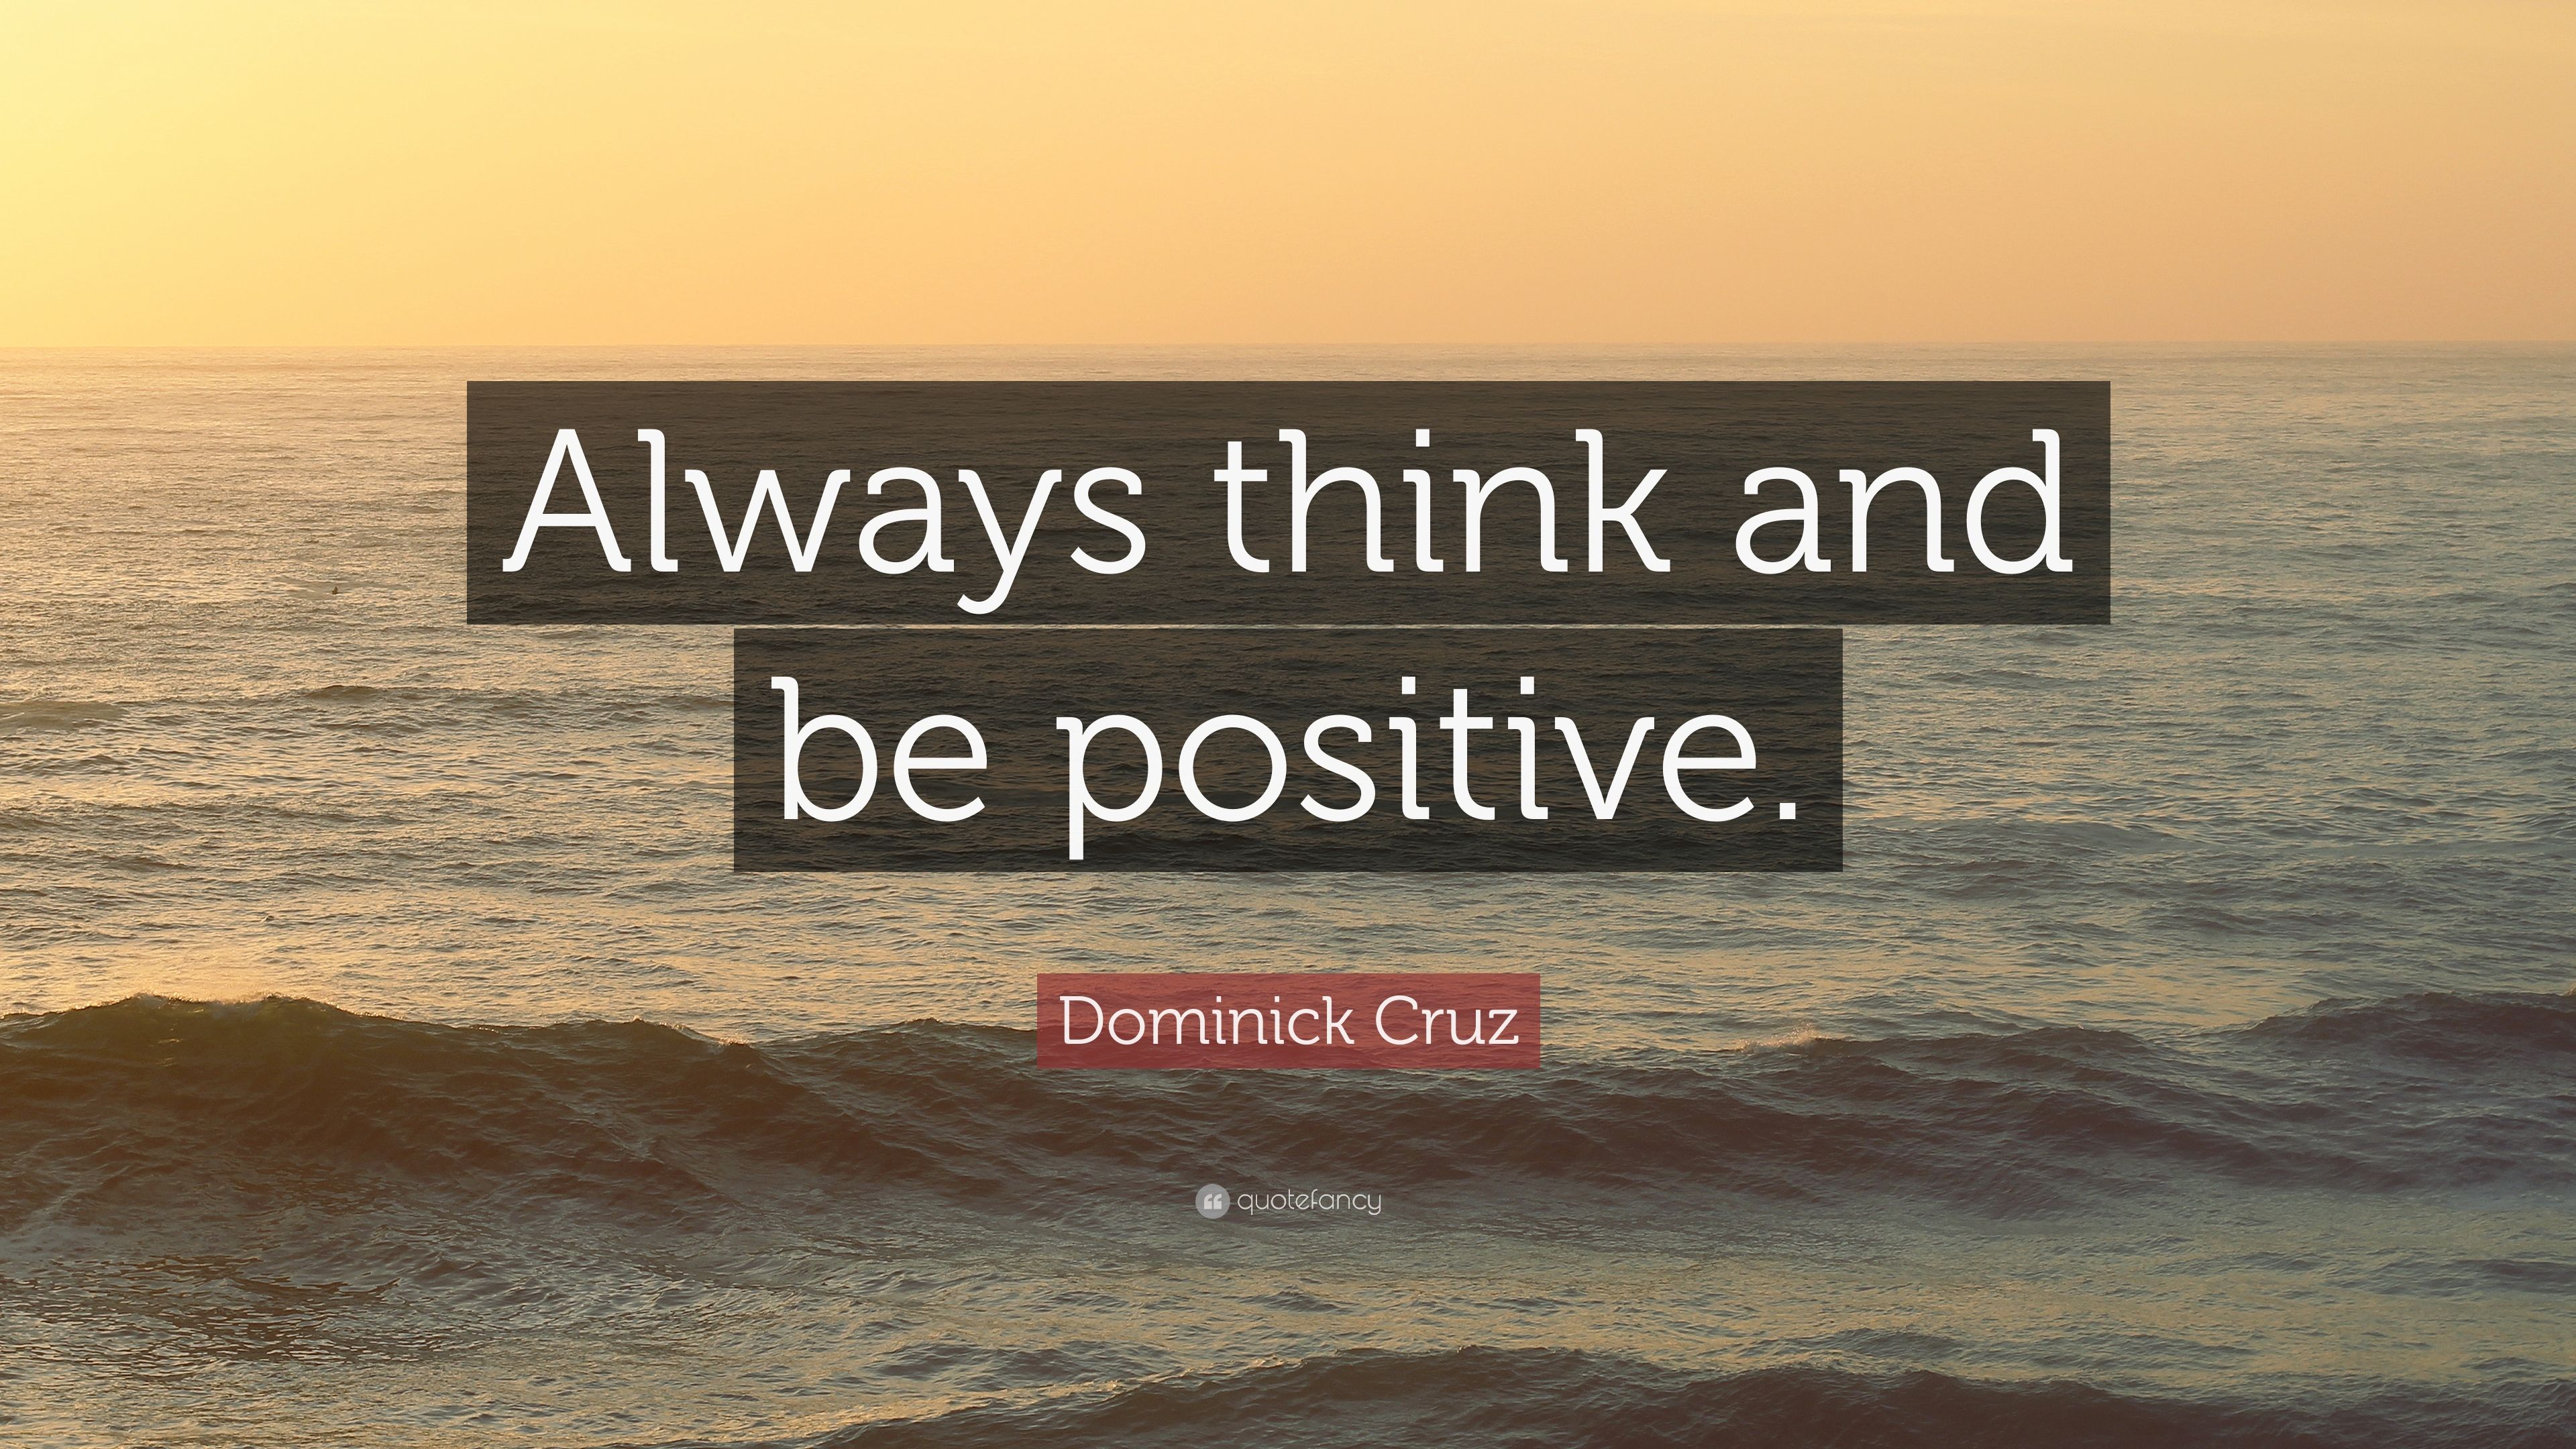 Dominick Cruz Quote: “Always think and be positive.” (12 wallpaper)